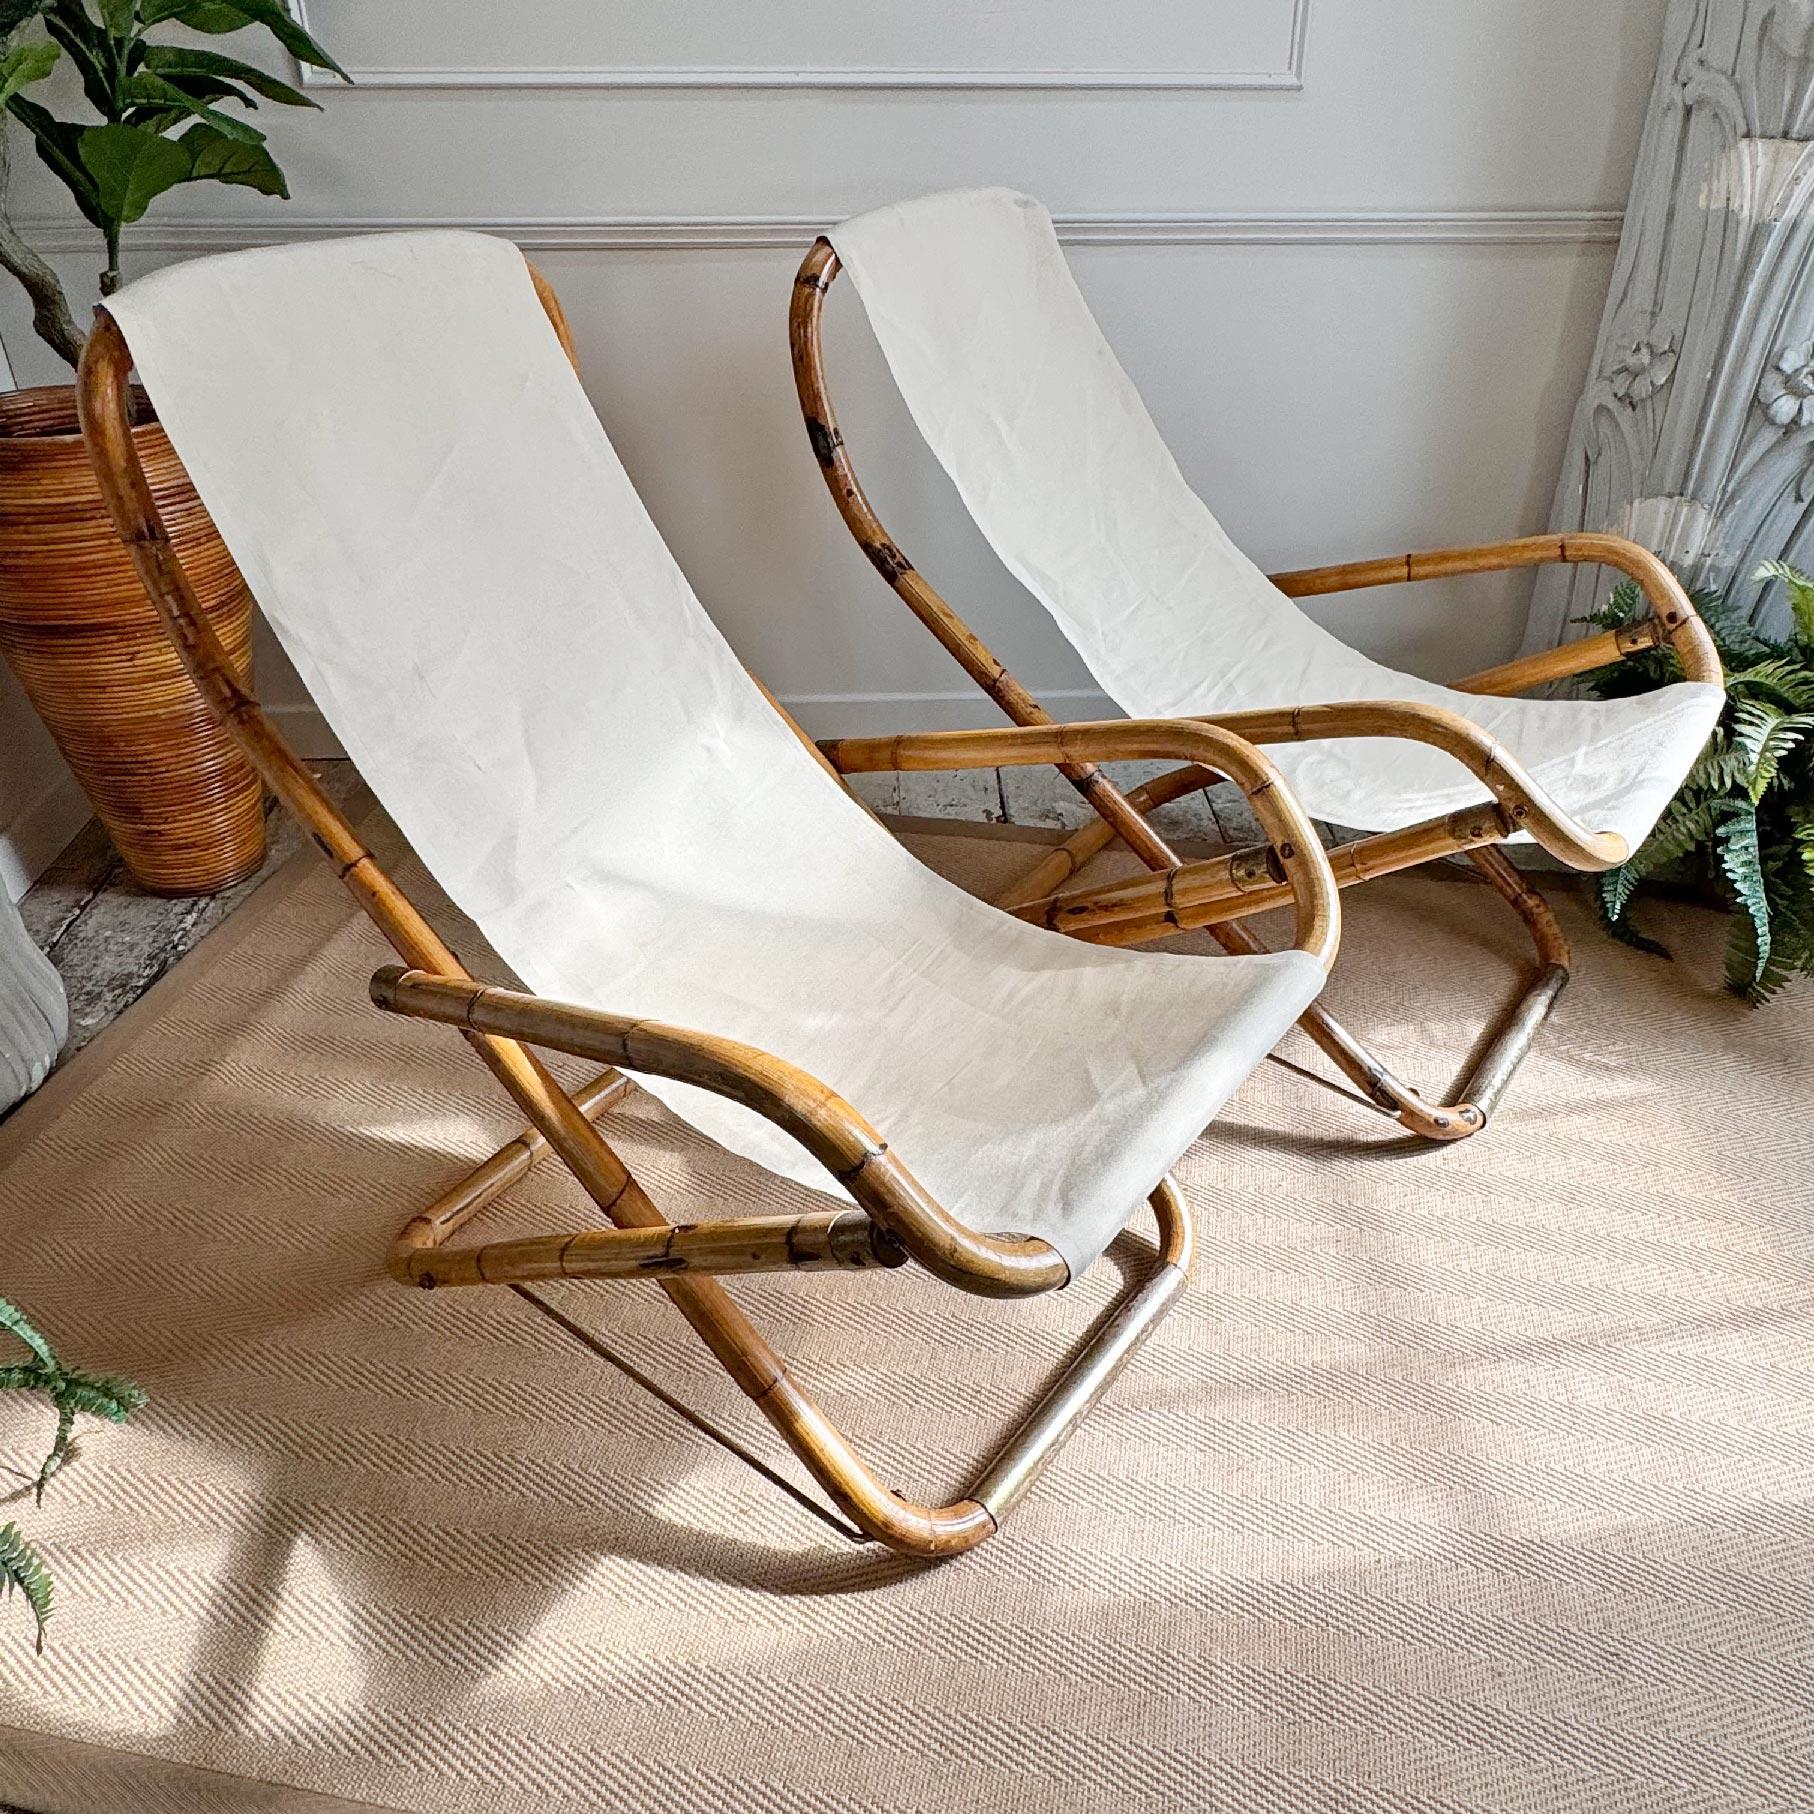 1960s Italian Bamboo Folding Deck Chairs For Sale 4